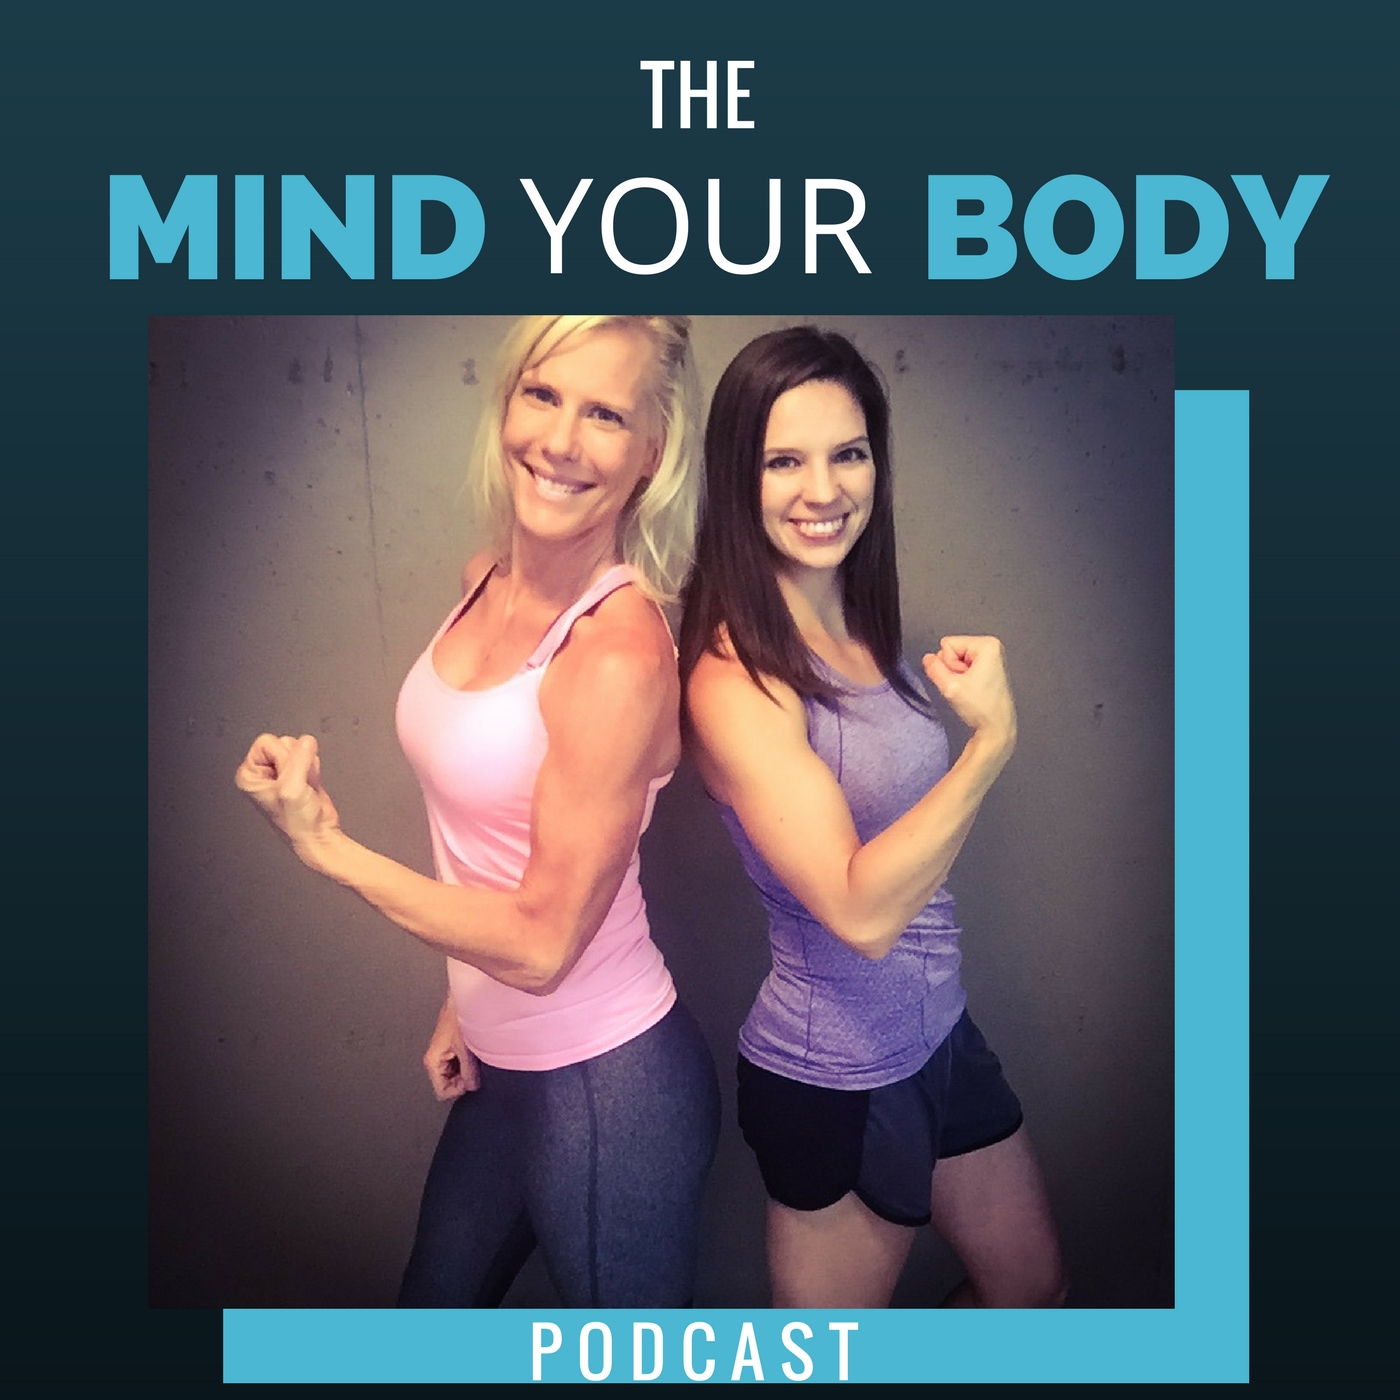 #1: Intro to Lisa and Jenny and The “Big Why” Behind The Mind Your Body Podcast